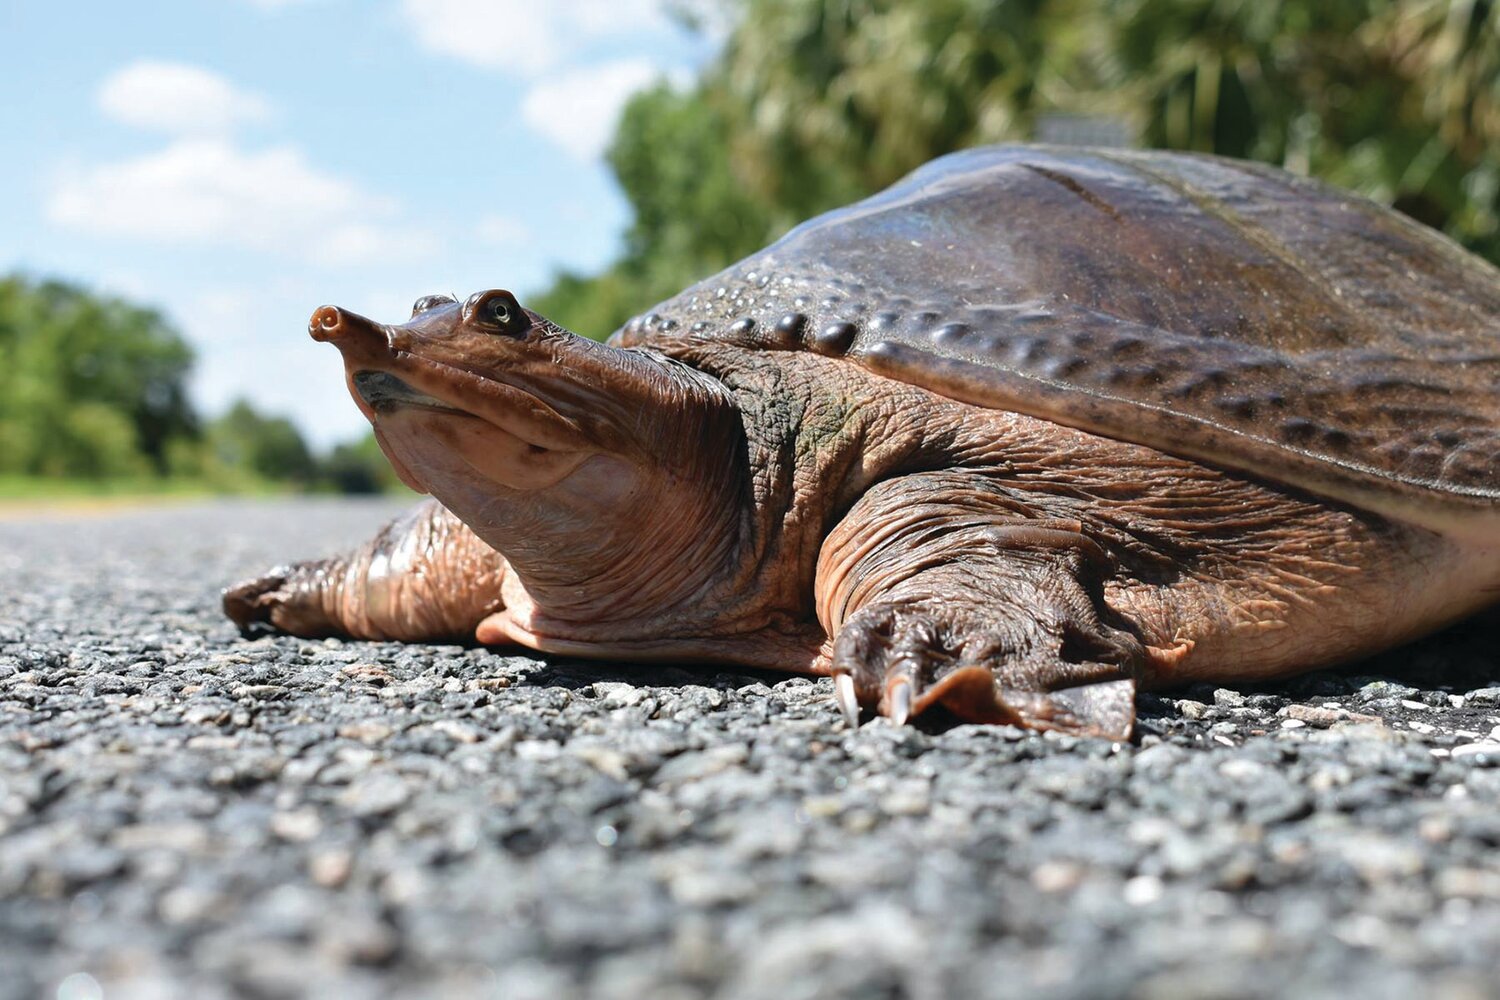 Healthy softshell turtles are active and alert.